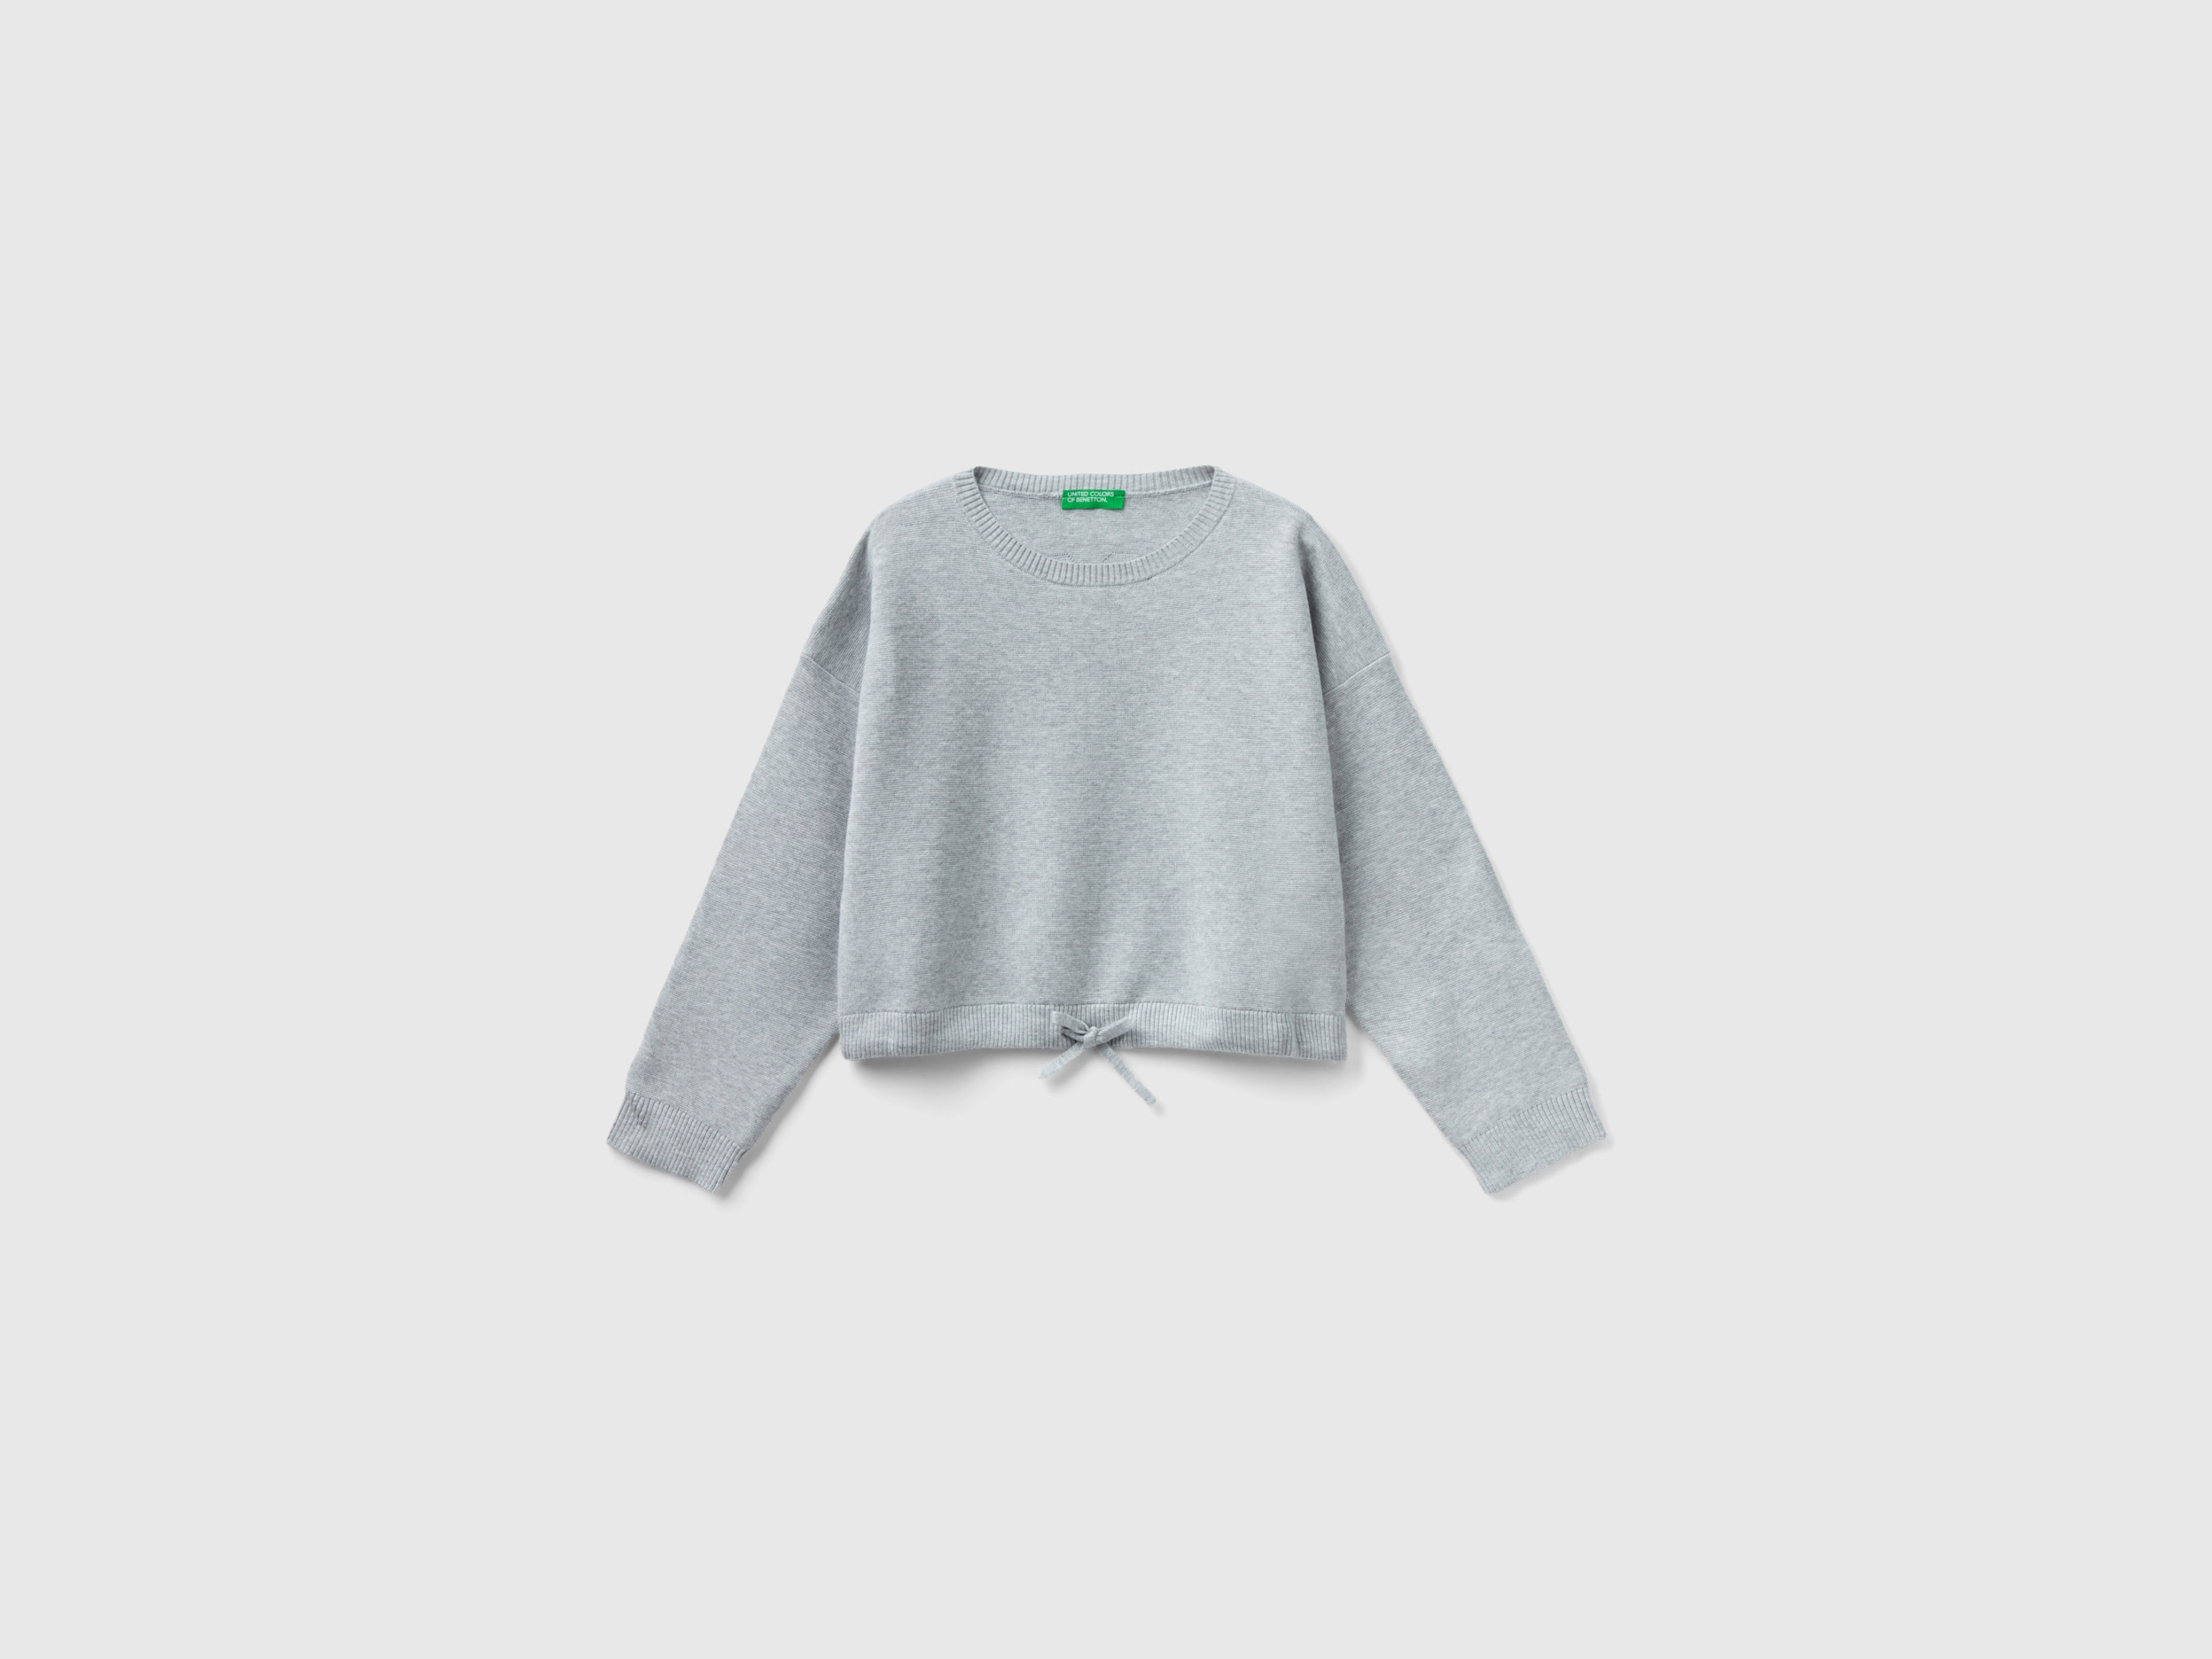 Benetton, Sweater With Drawstring, size M, Gray, Kids